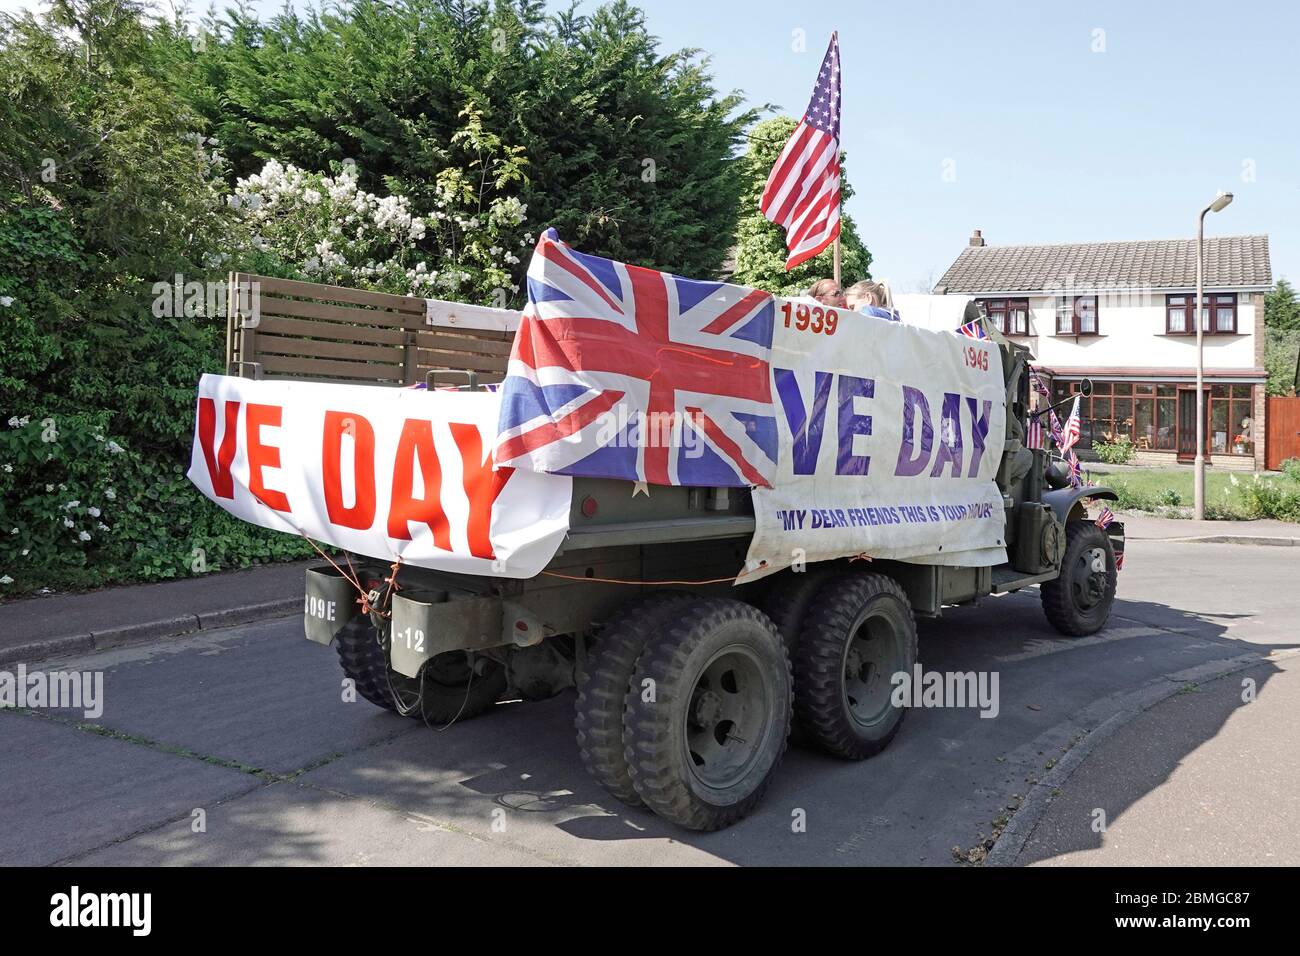 USA preserved military truck decorated VE day Union Jack & American Stars & Stripes flag calling at 2020 street celebrations parties Essex England UK Stock Photo